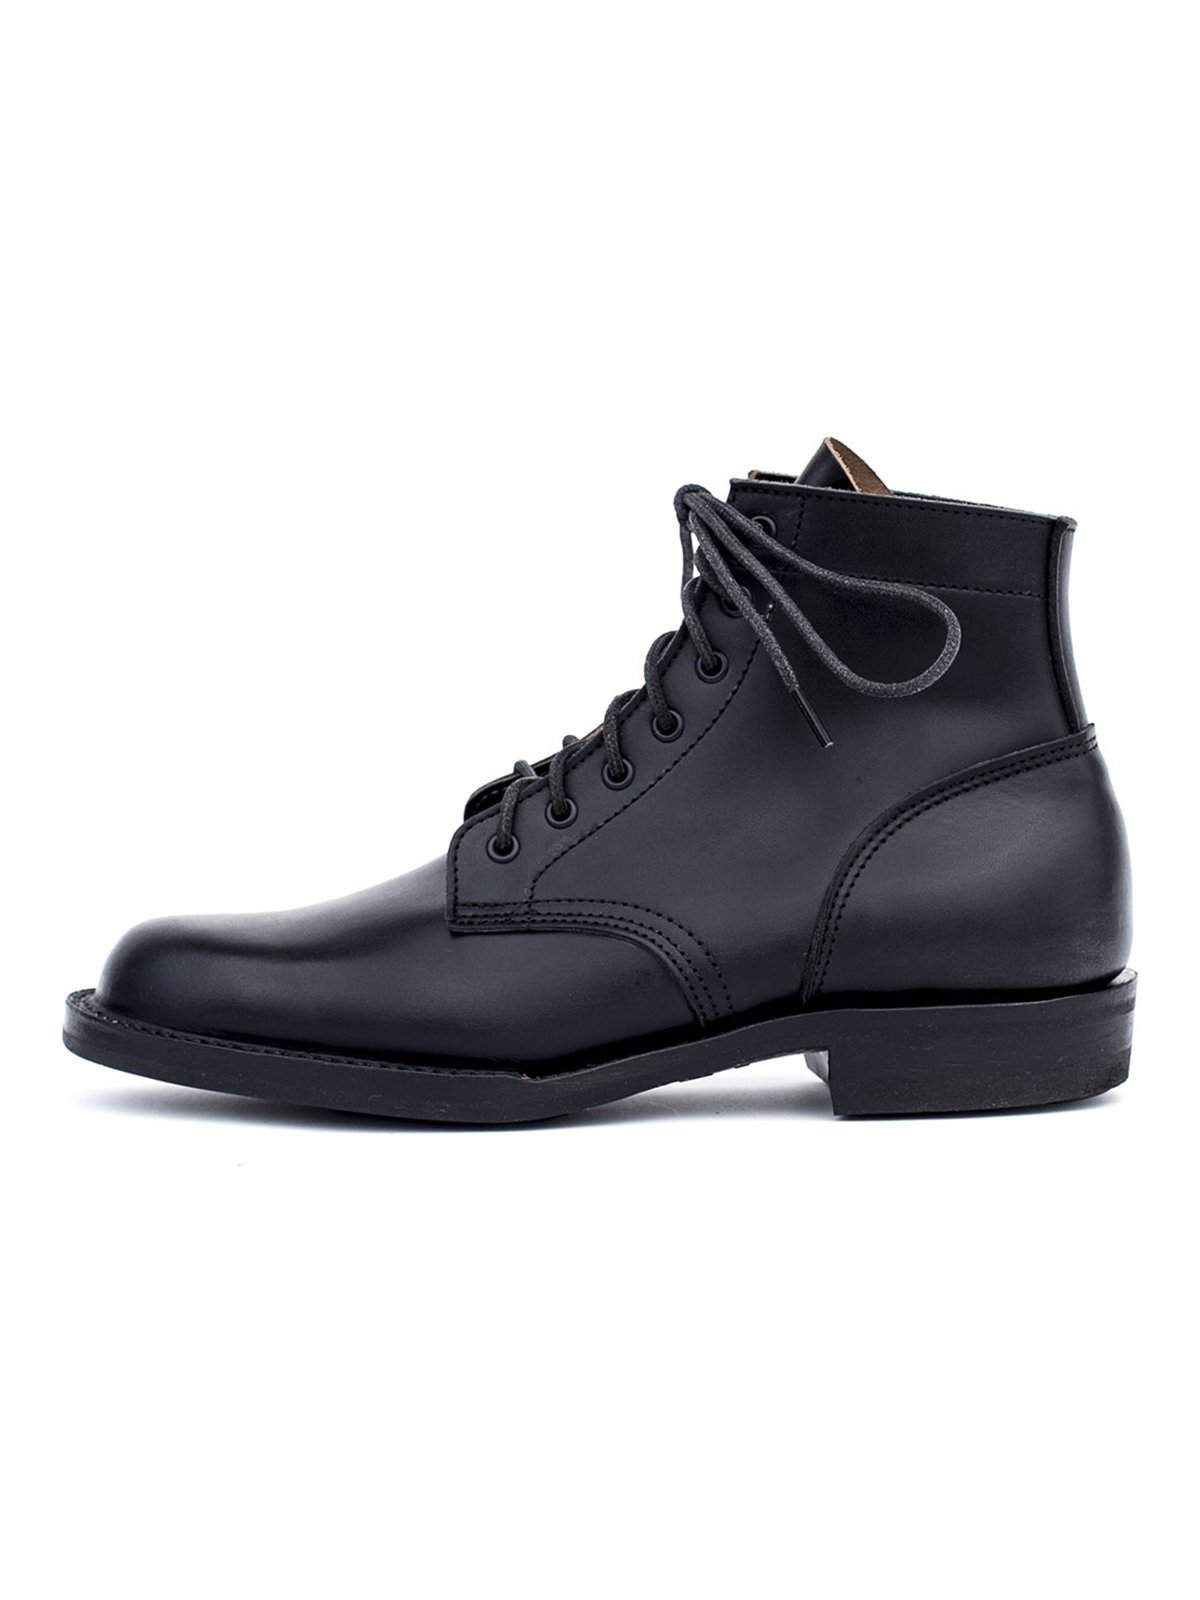 Truman Boot Co. Nero Blacked Out - MORE by Morello Indonesia